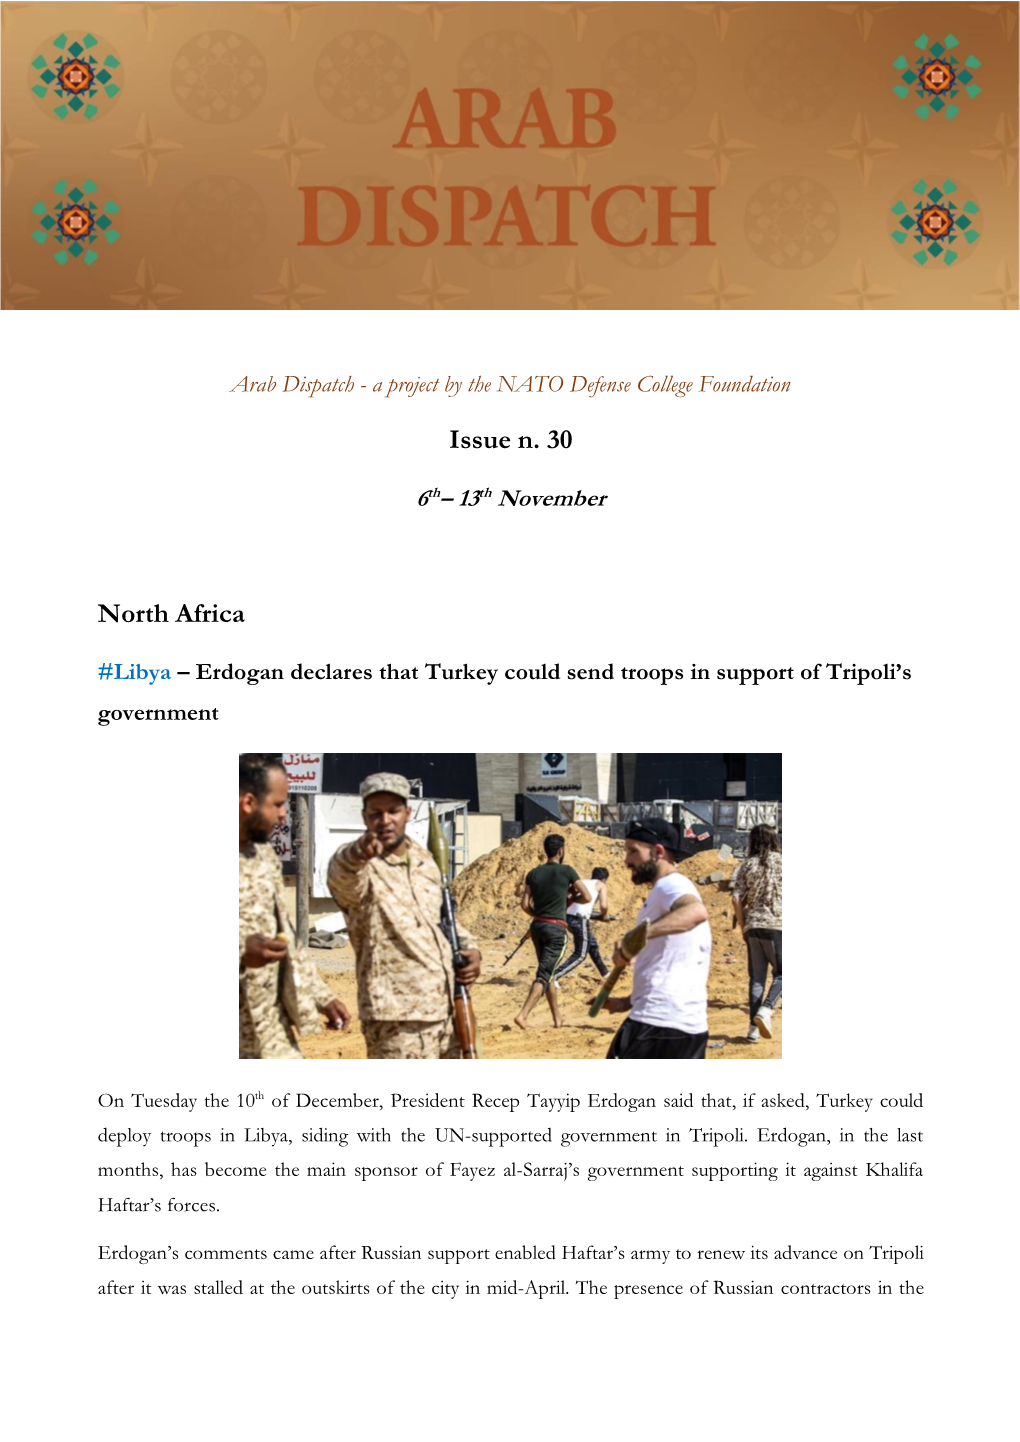 Arab Dispatch - a Project by the NATO Defense College Foundation